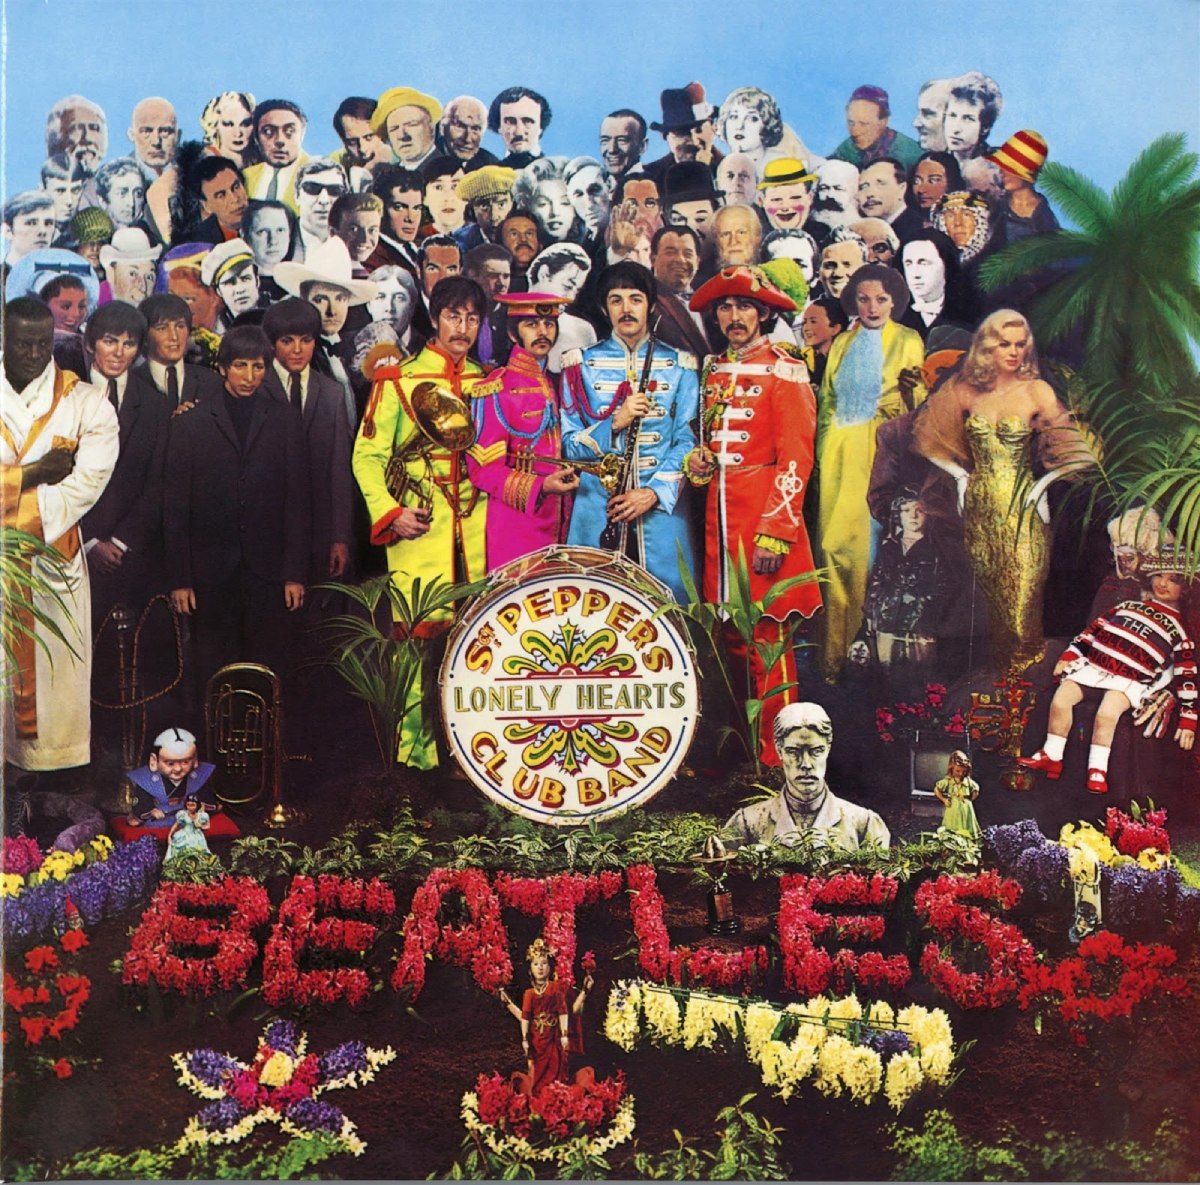 Cover von "Sgt. Pepper's Lonely Hearts Club Band" von The Beatles